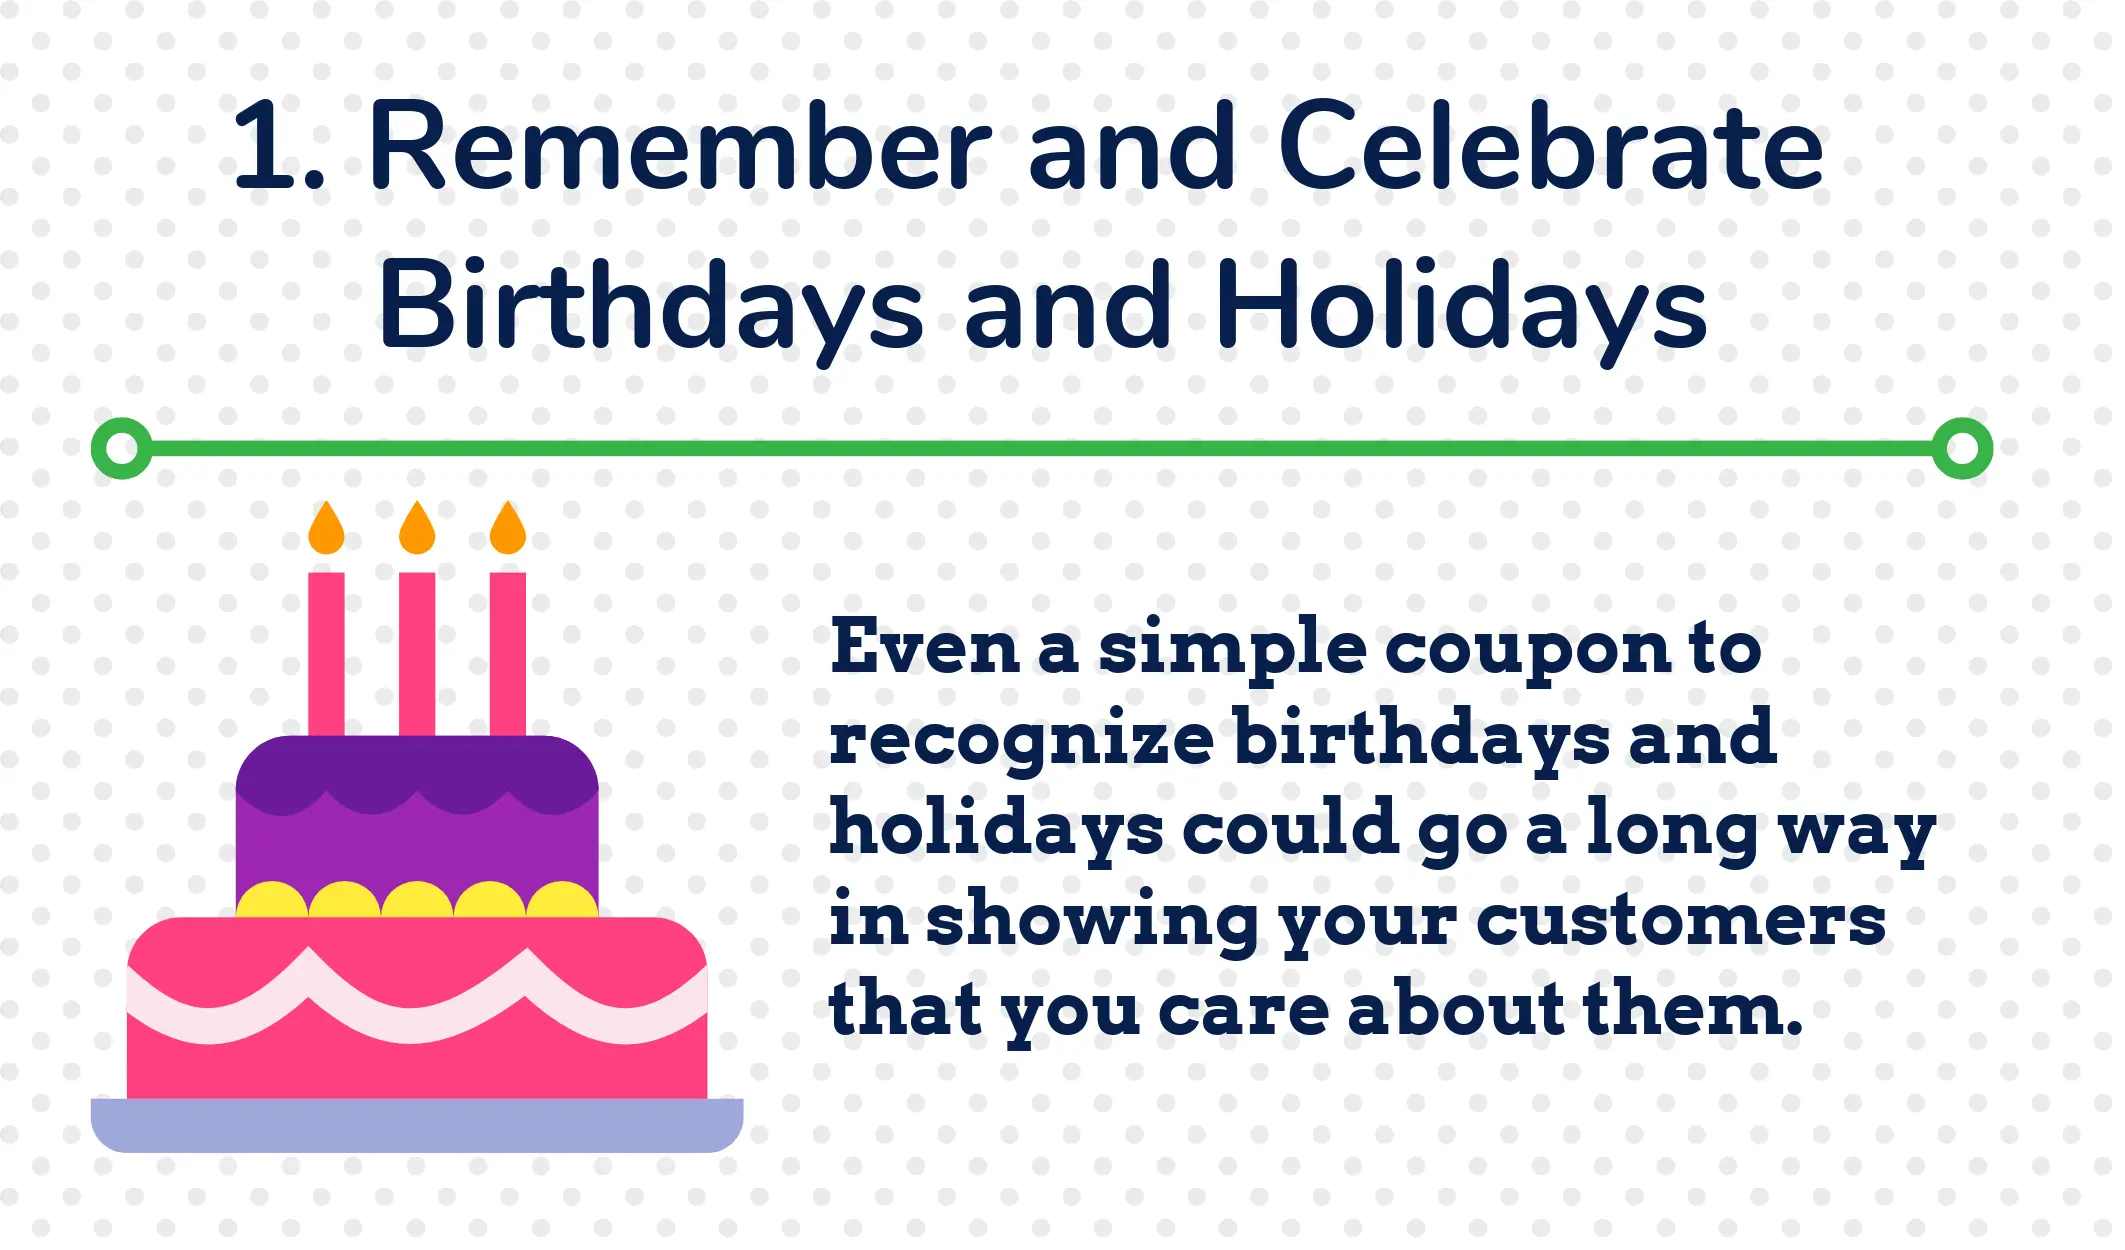 1. Remember and Celebrate Birthdays and Holidays